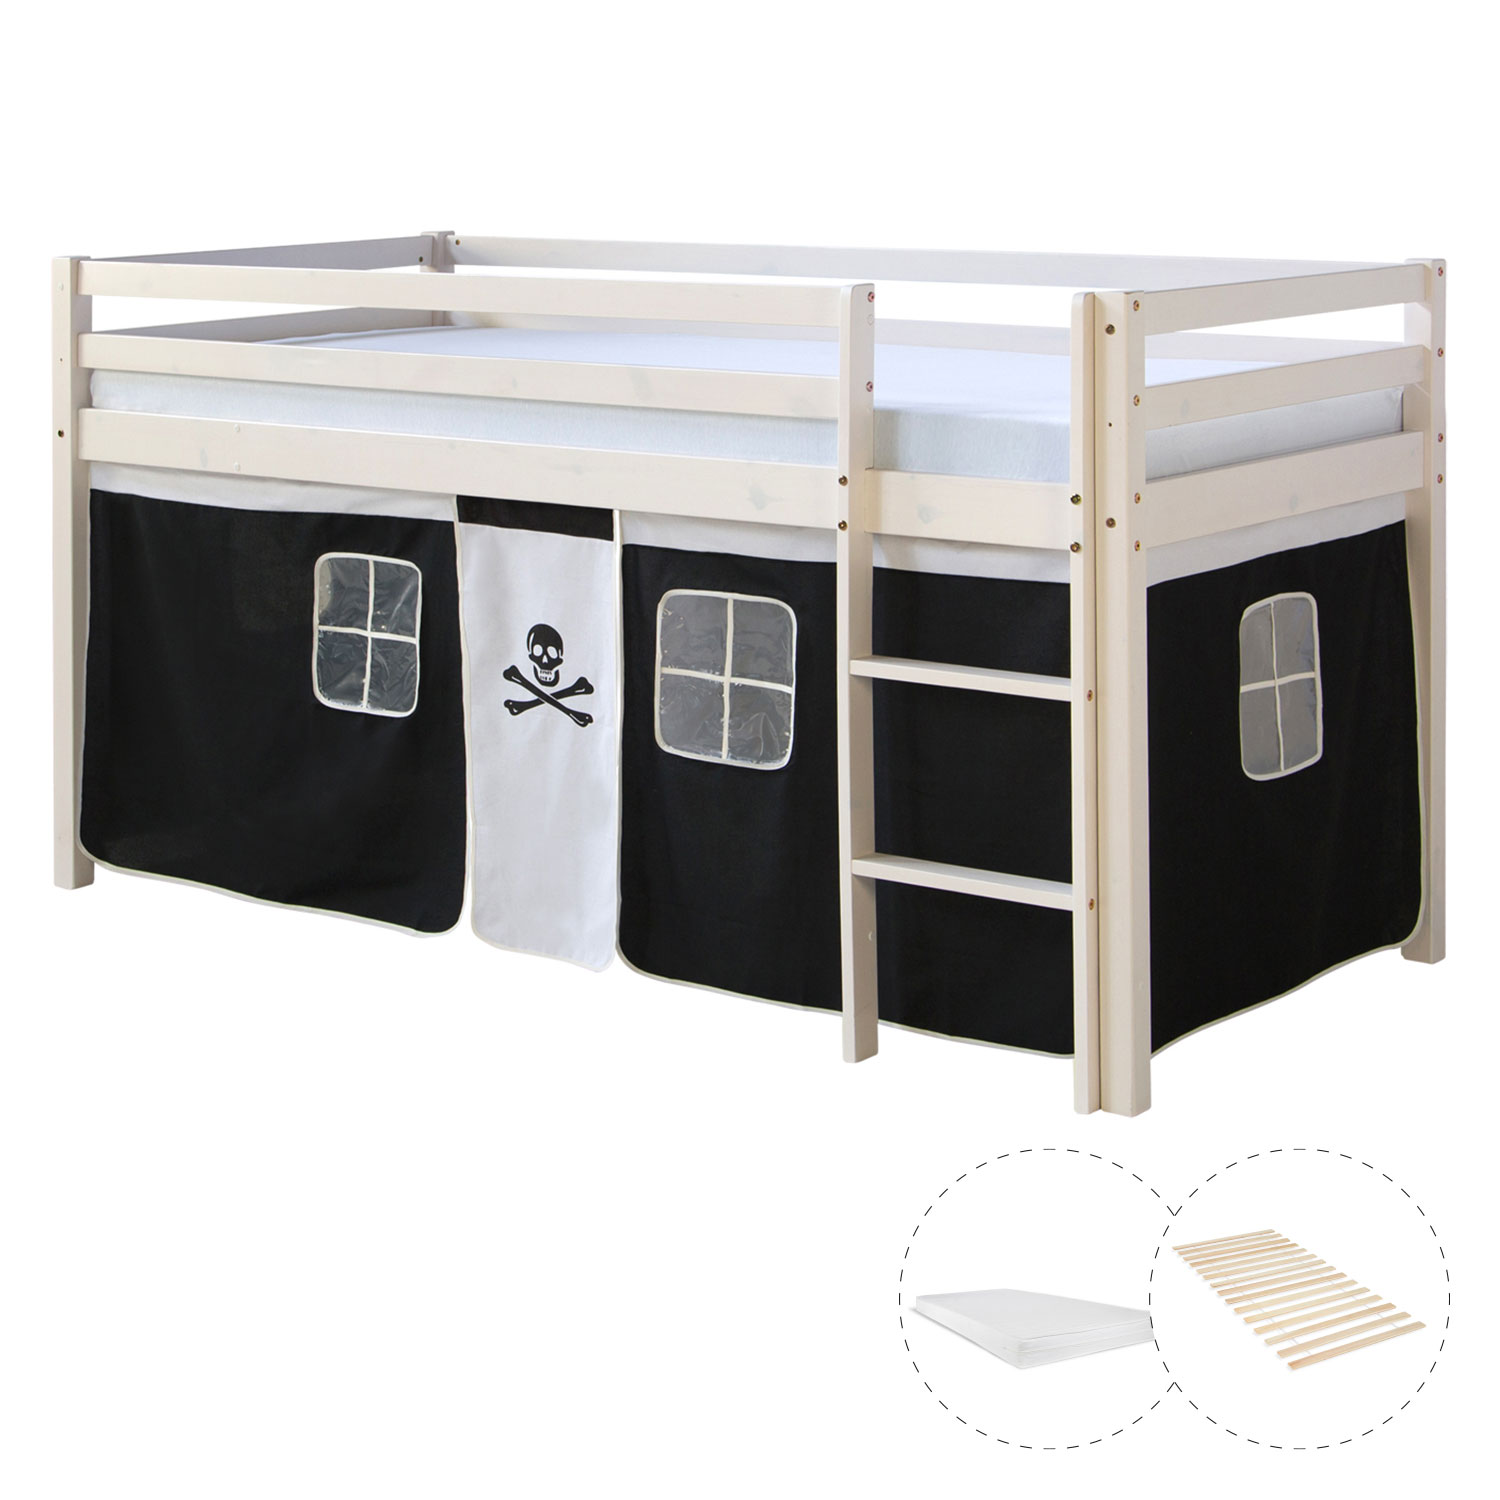 Loftbed 90x200 cm with Mattress Bunk bed Childrens bed Solid Pine Wood Slats Curtain Black Pirate